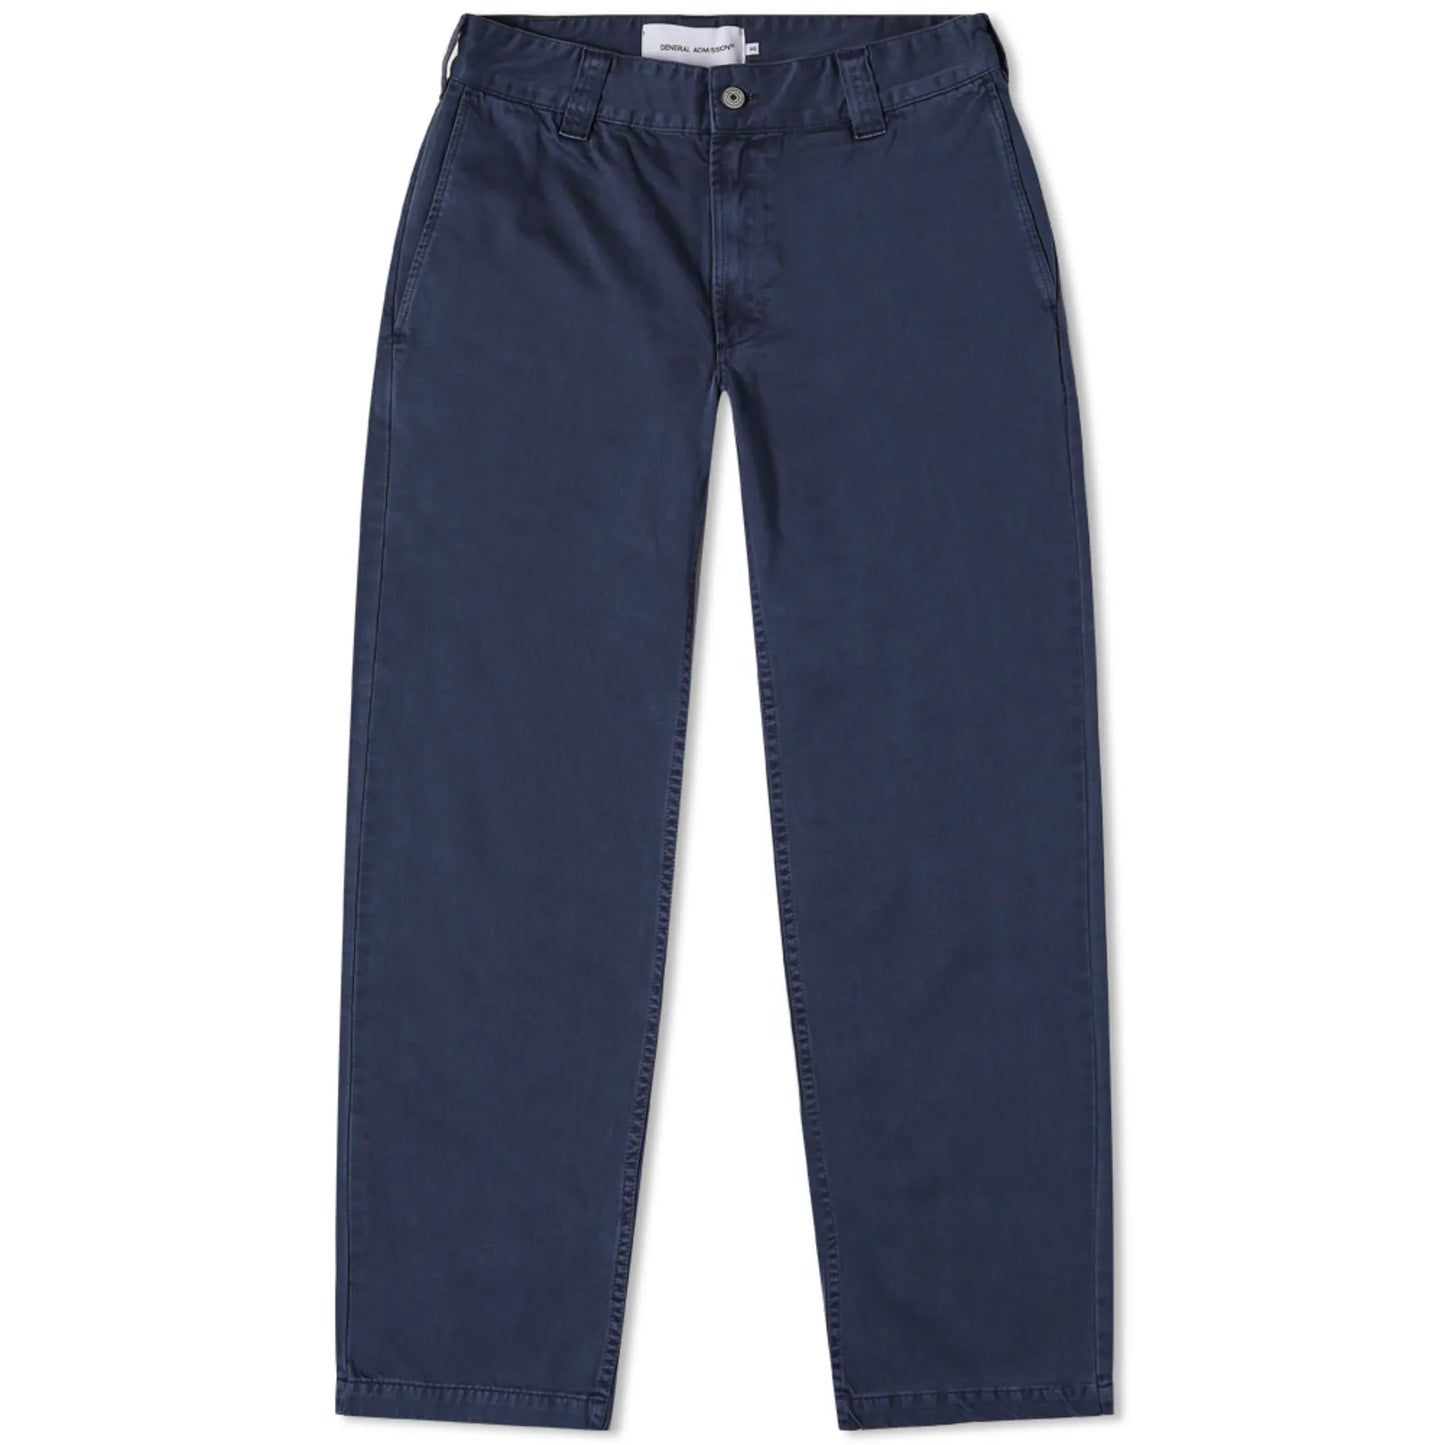 General Admission - GENERAL ADMISSION PICO PANT IN NAVY - Rent With Thred